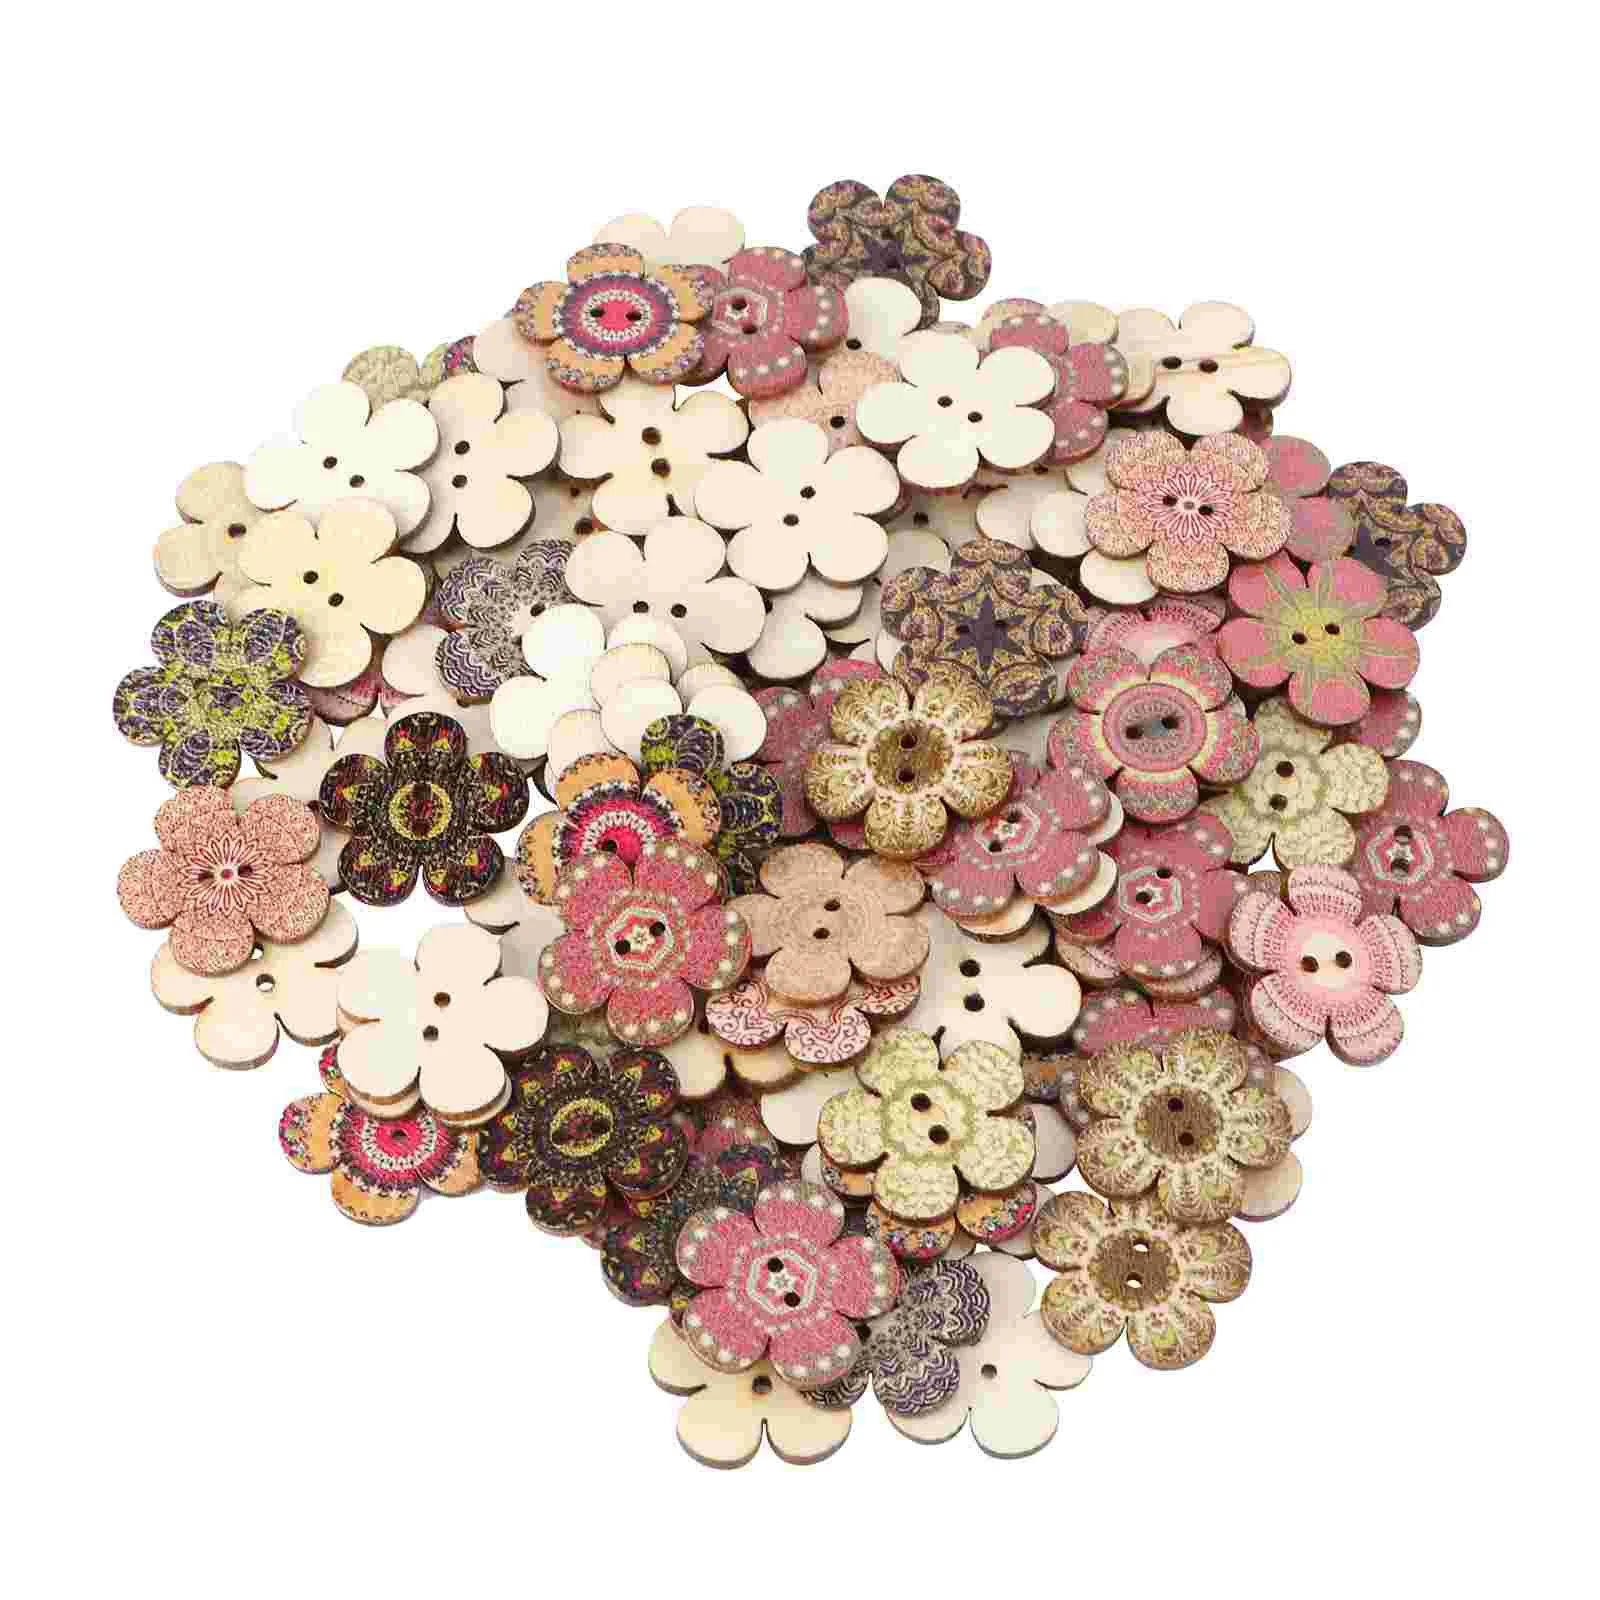 

100 Pcs Woodsy Decor Bouton Bois Buttons Sewing Clothes DIY Decor Wooden Flowers Crafted Button